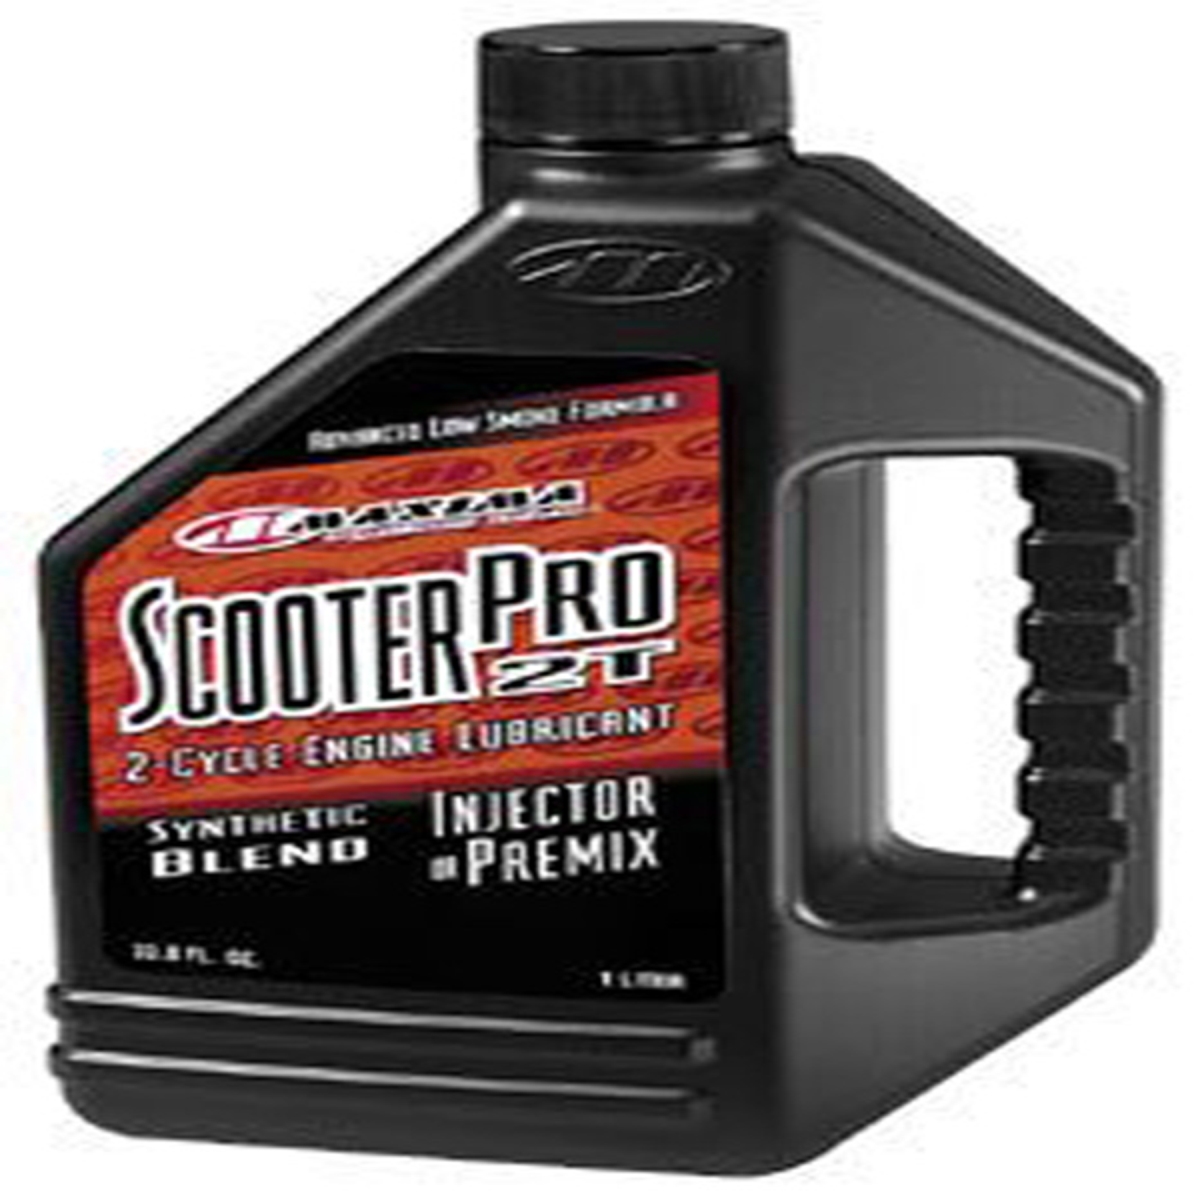 27901 1 Litre Scooter Pro Synthetic Injector Premix